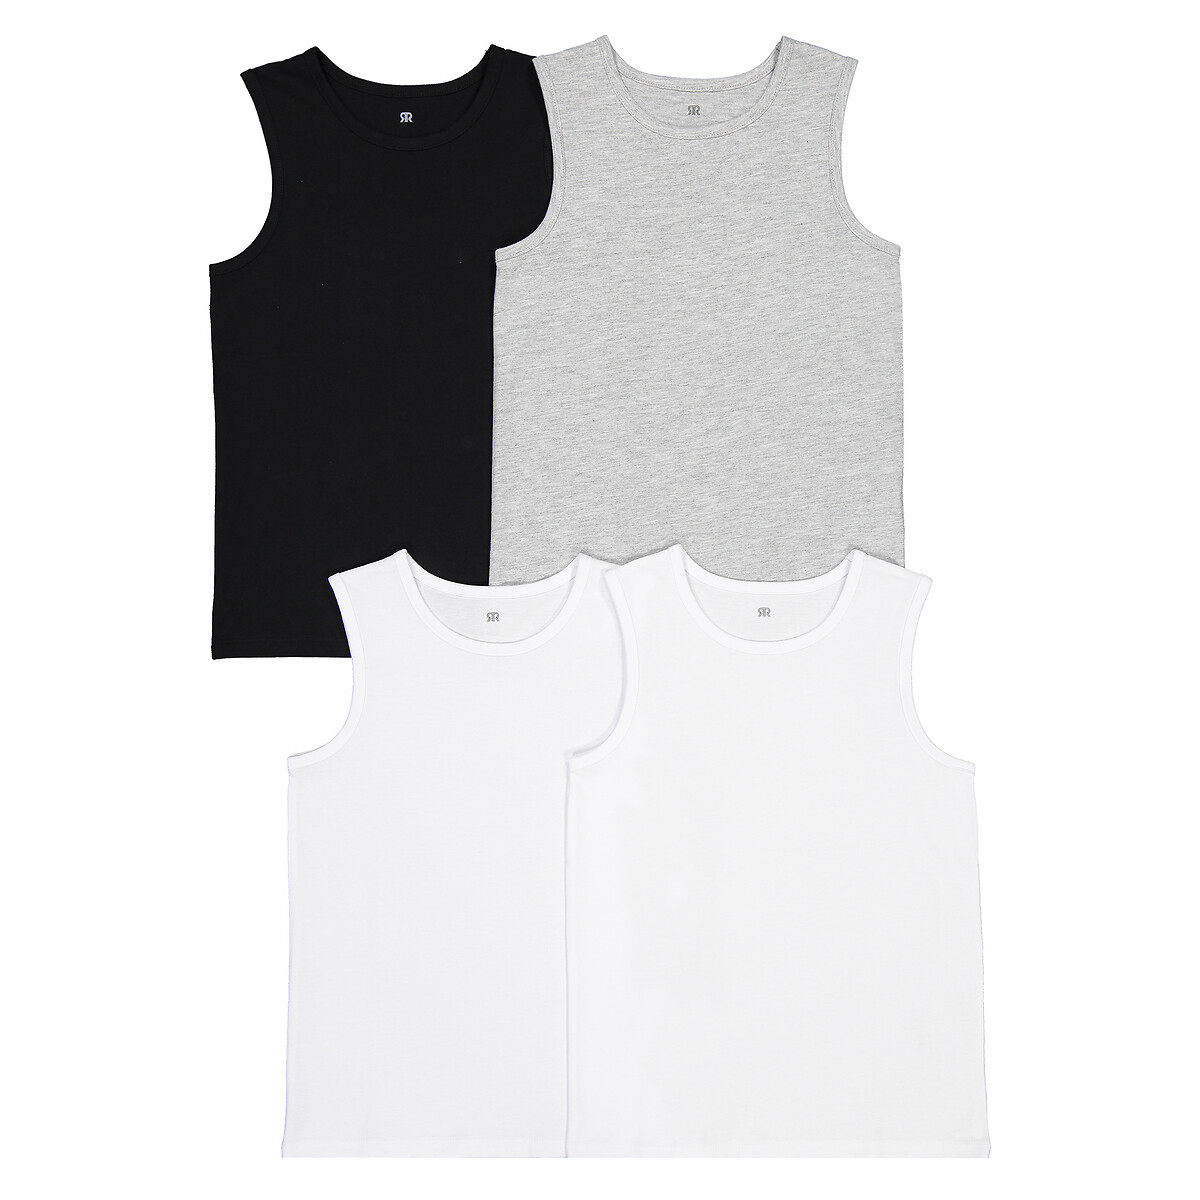 4er-Pack Tops von LA REDOUTE COLLECTIONS